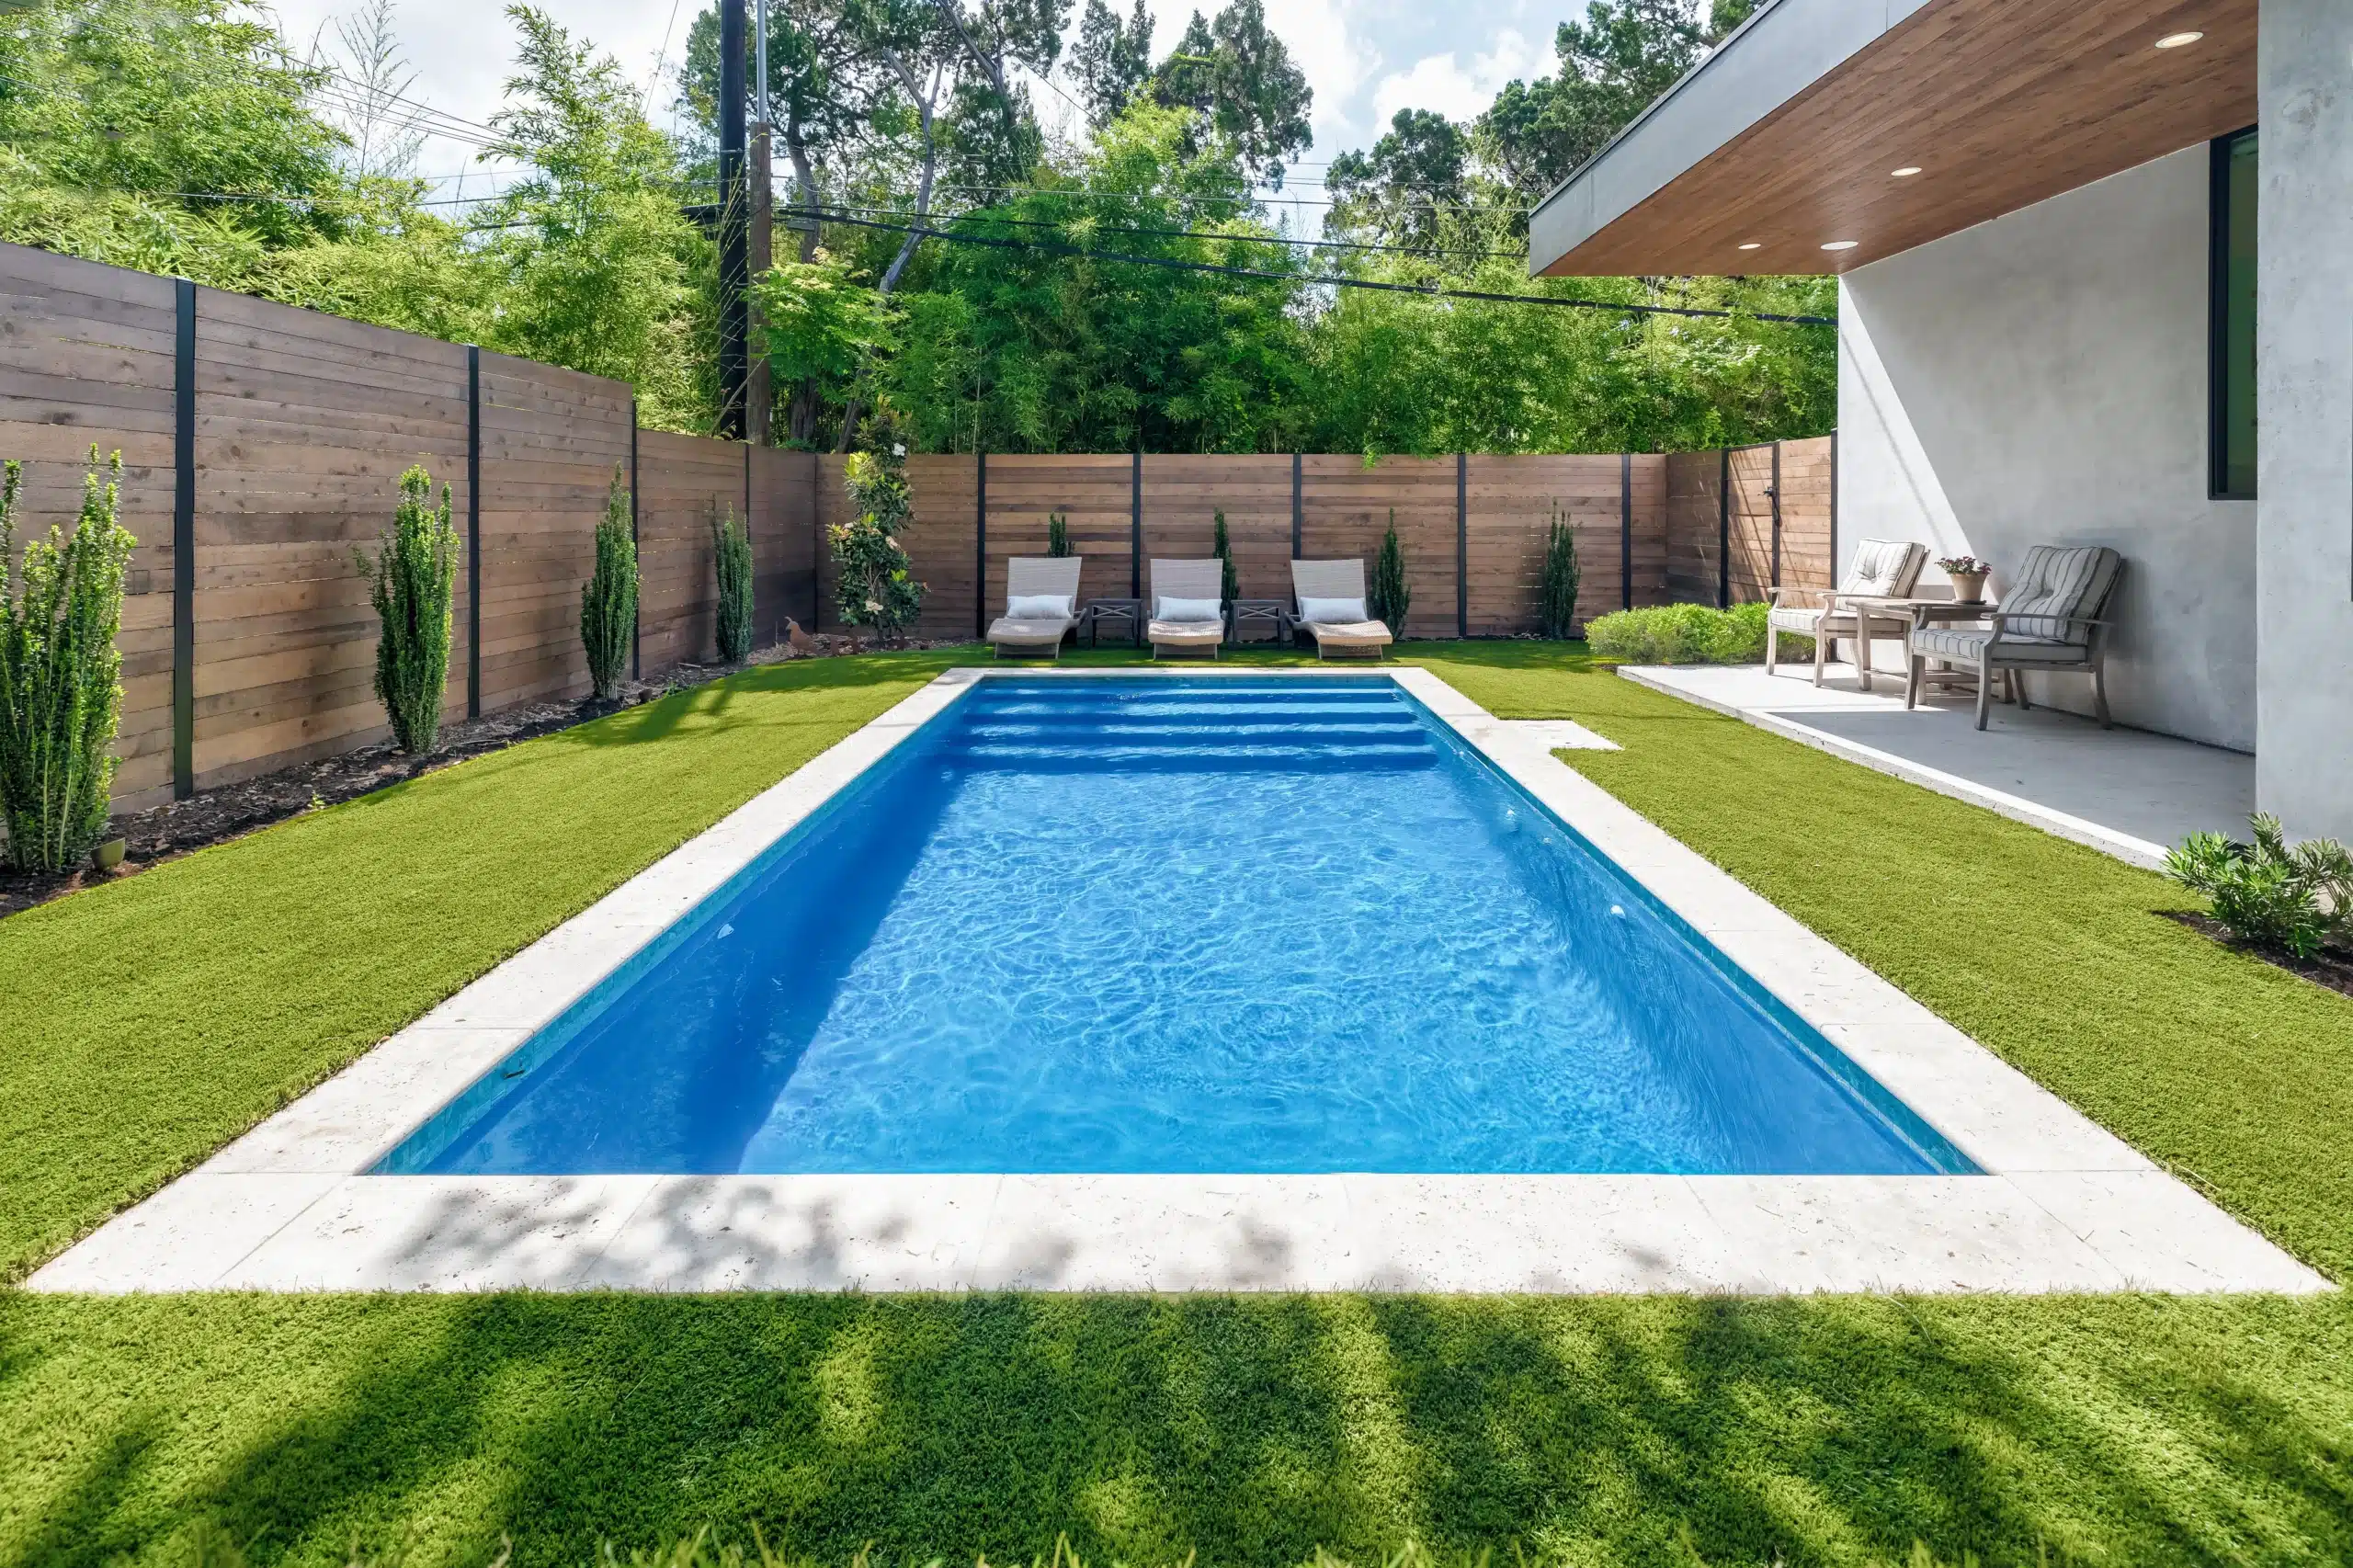 pool with clear blue water and lounge chairs surrounded by lush green grass and horizontal privacy fence